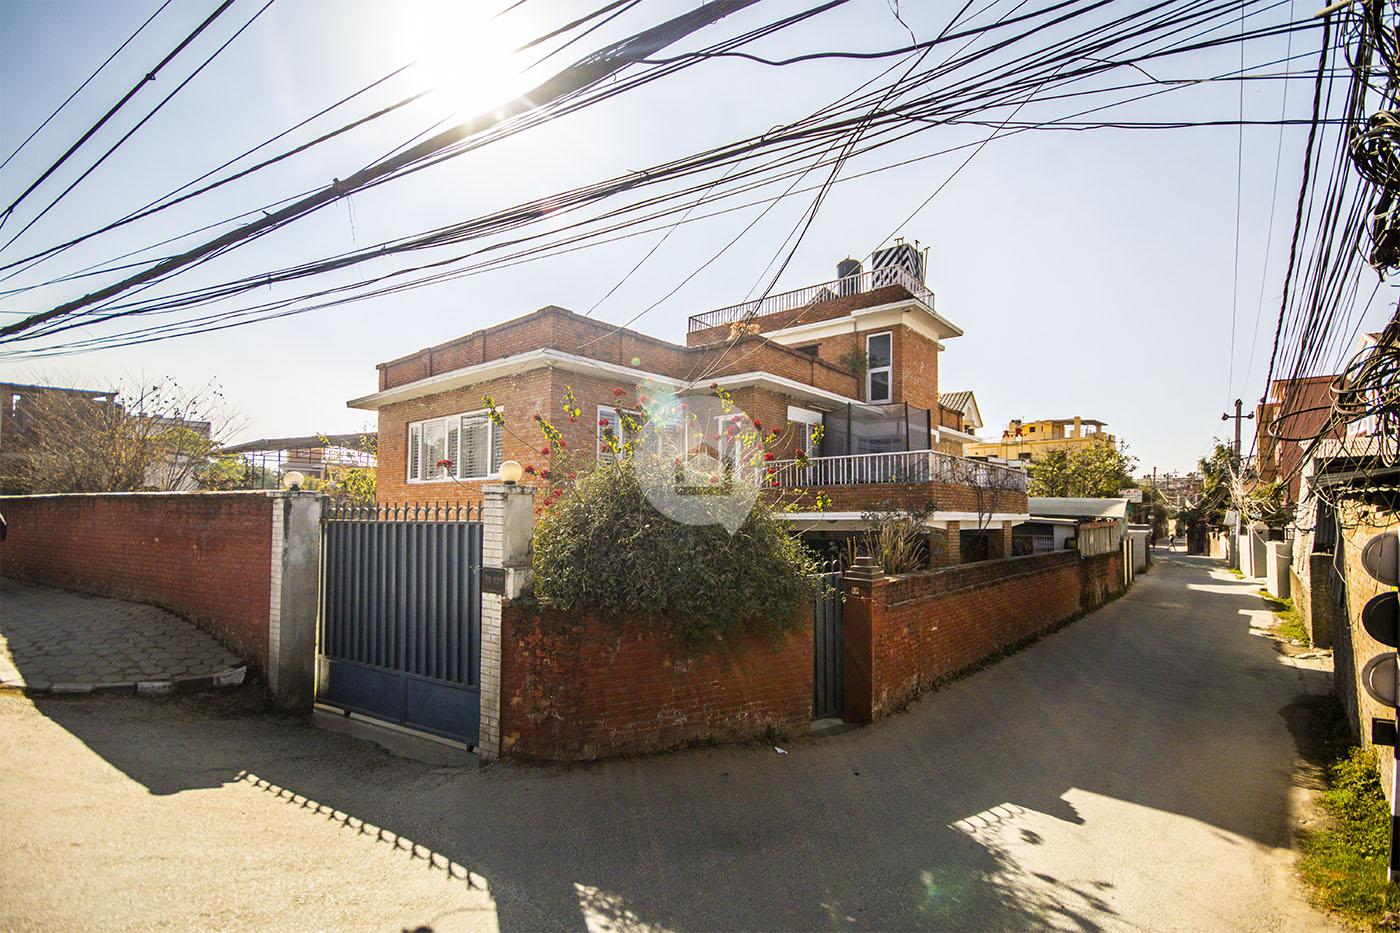 Attractive House is for Sale : House for Sale in Baluwatar, Kathmandu Image 7